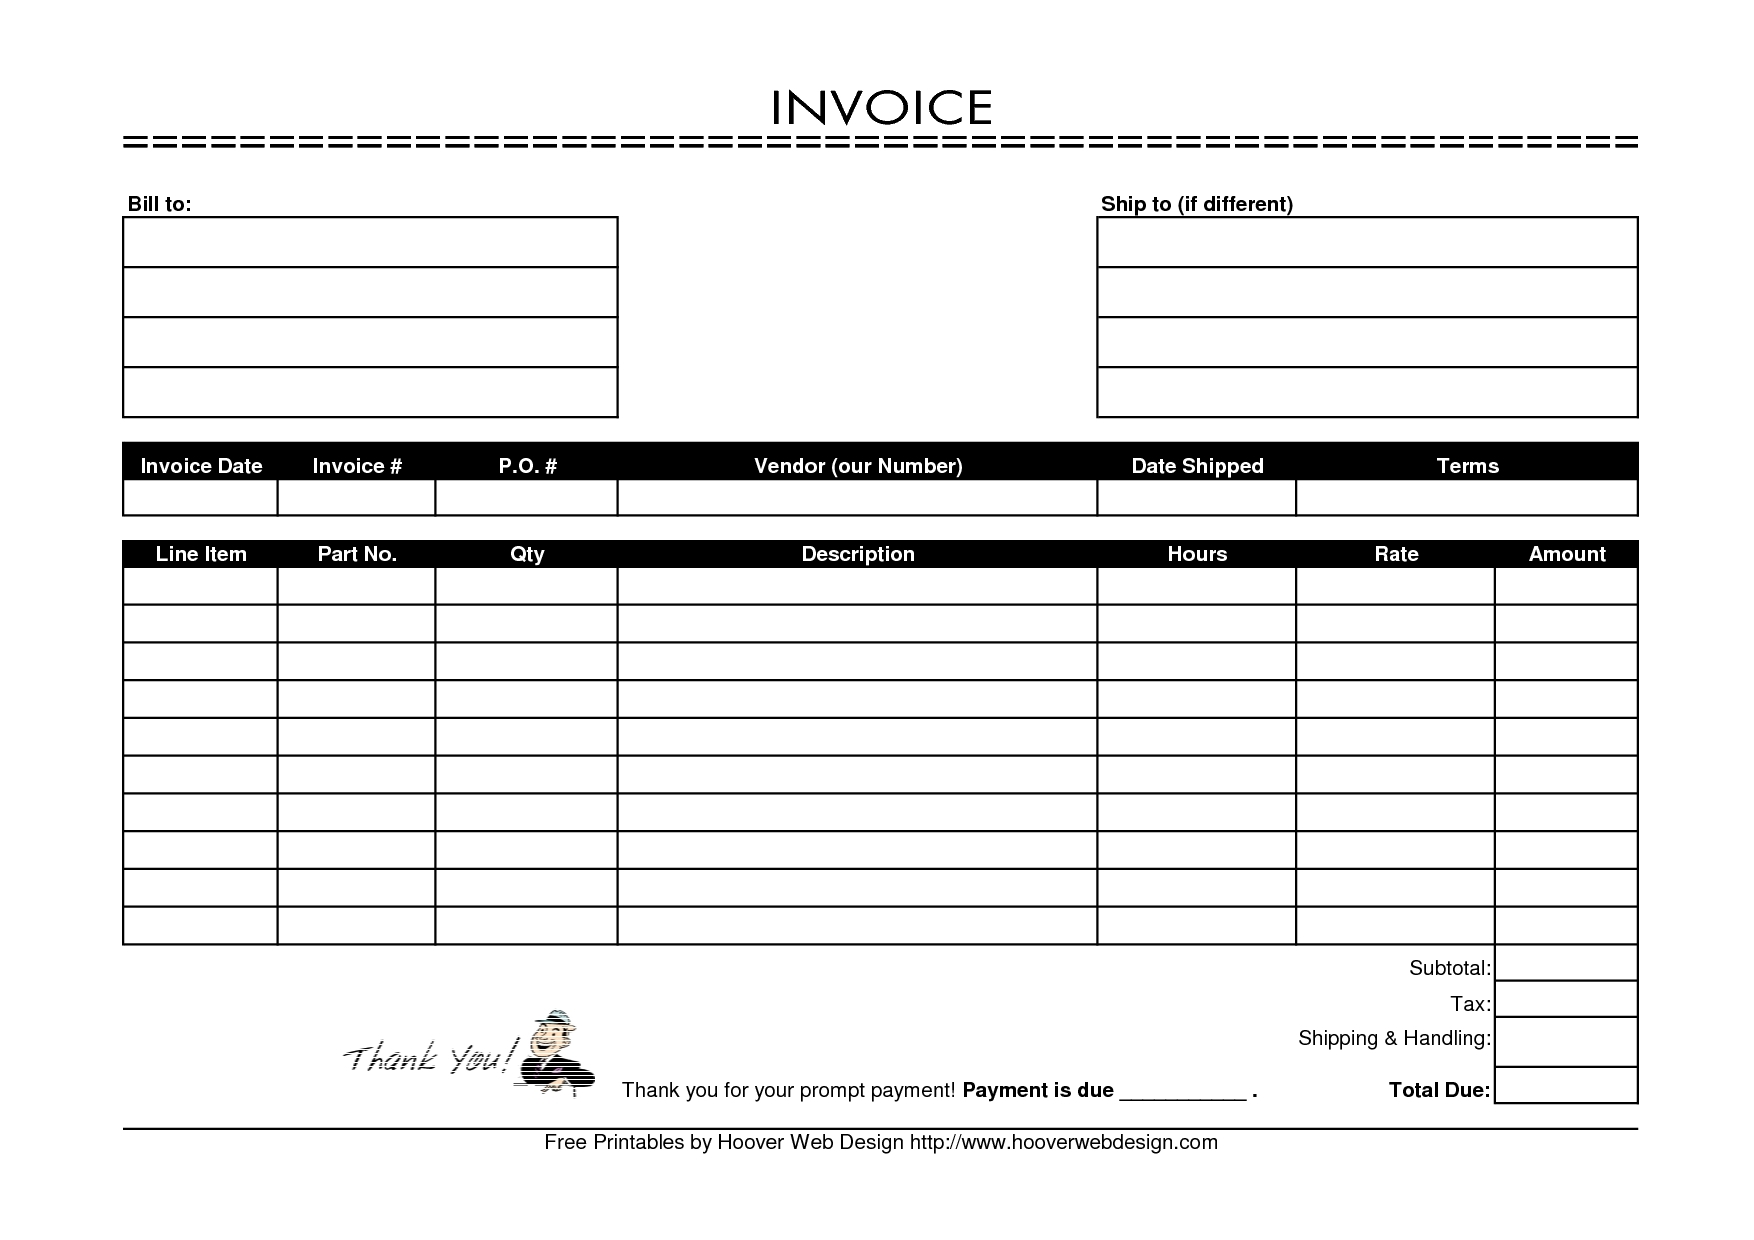 free printable invoice invoice templat creating invoices free blank invoice forms download free